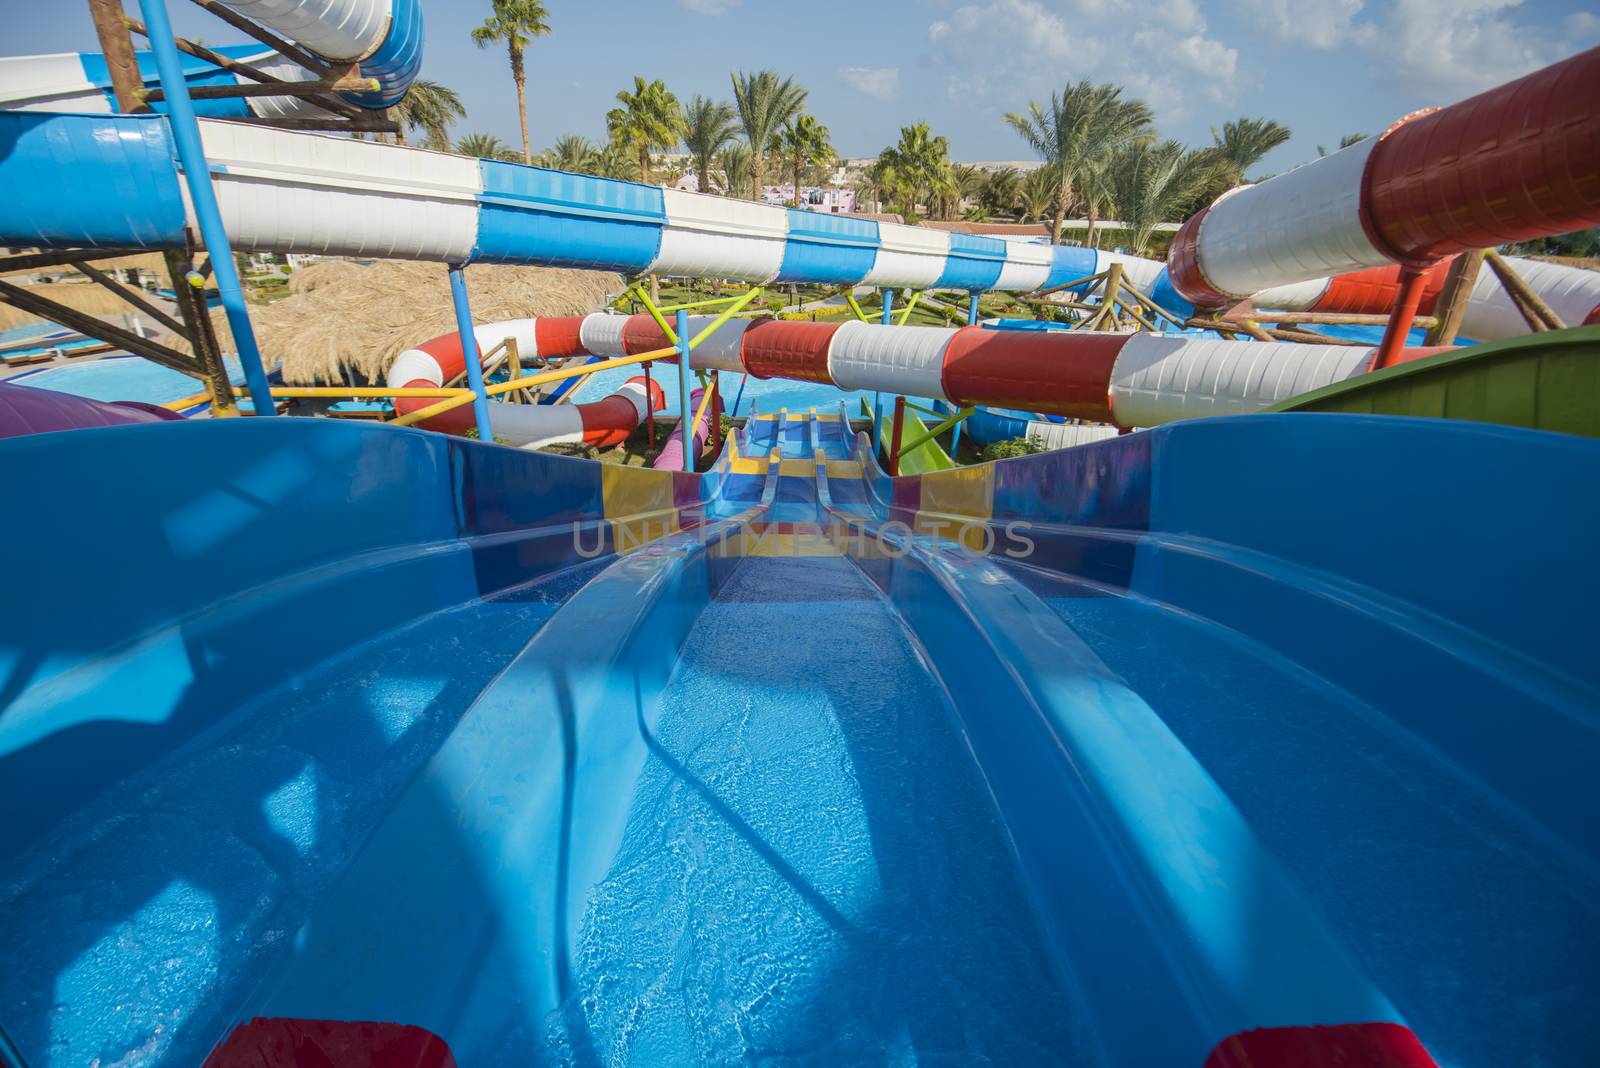 Large swimming pool aqua park water slides at a luxury tropical hotel resort